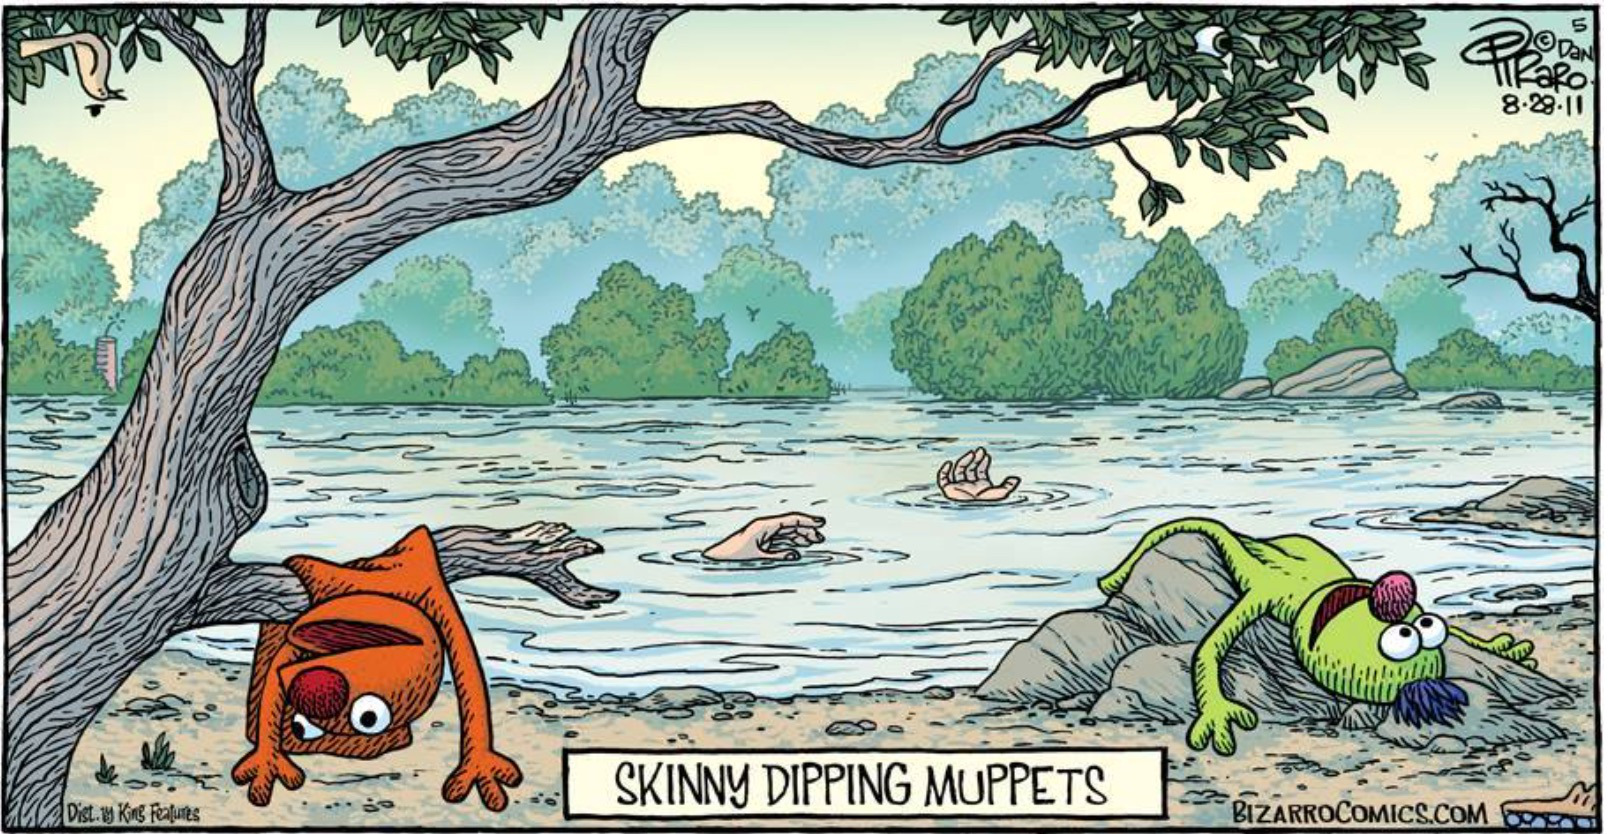 Cartoon Of The Day: Skinny Dipping Muppets.